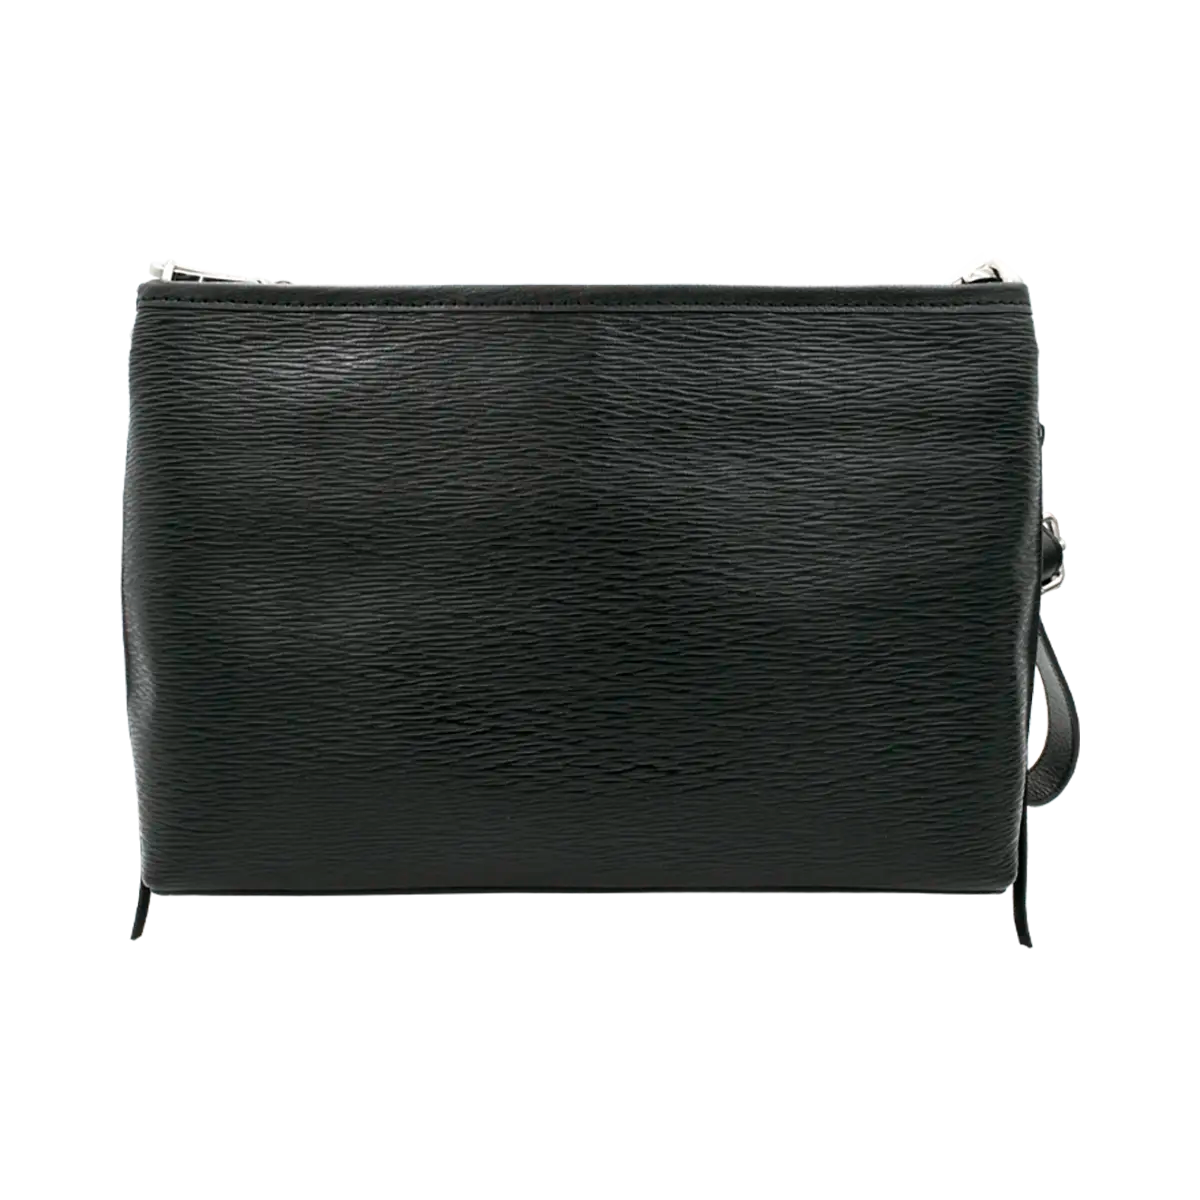 black small black leather crossbody bag with fringe. Fashion accessory for women in San Diego, CA.